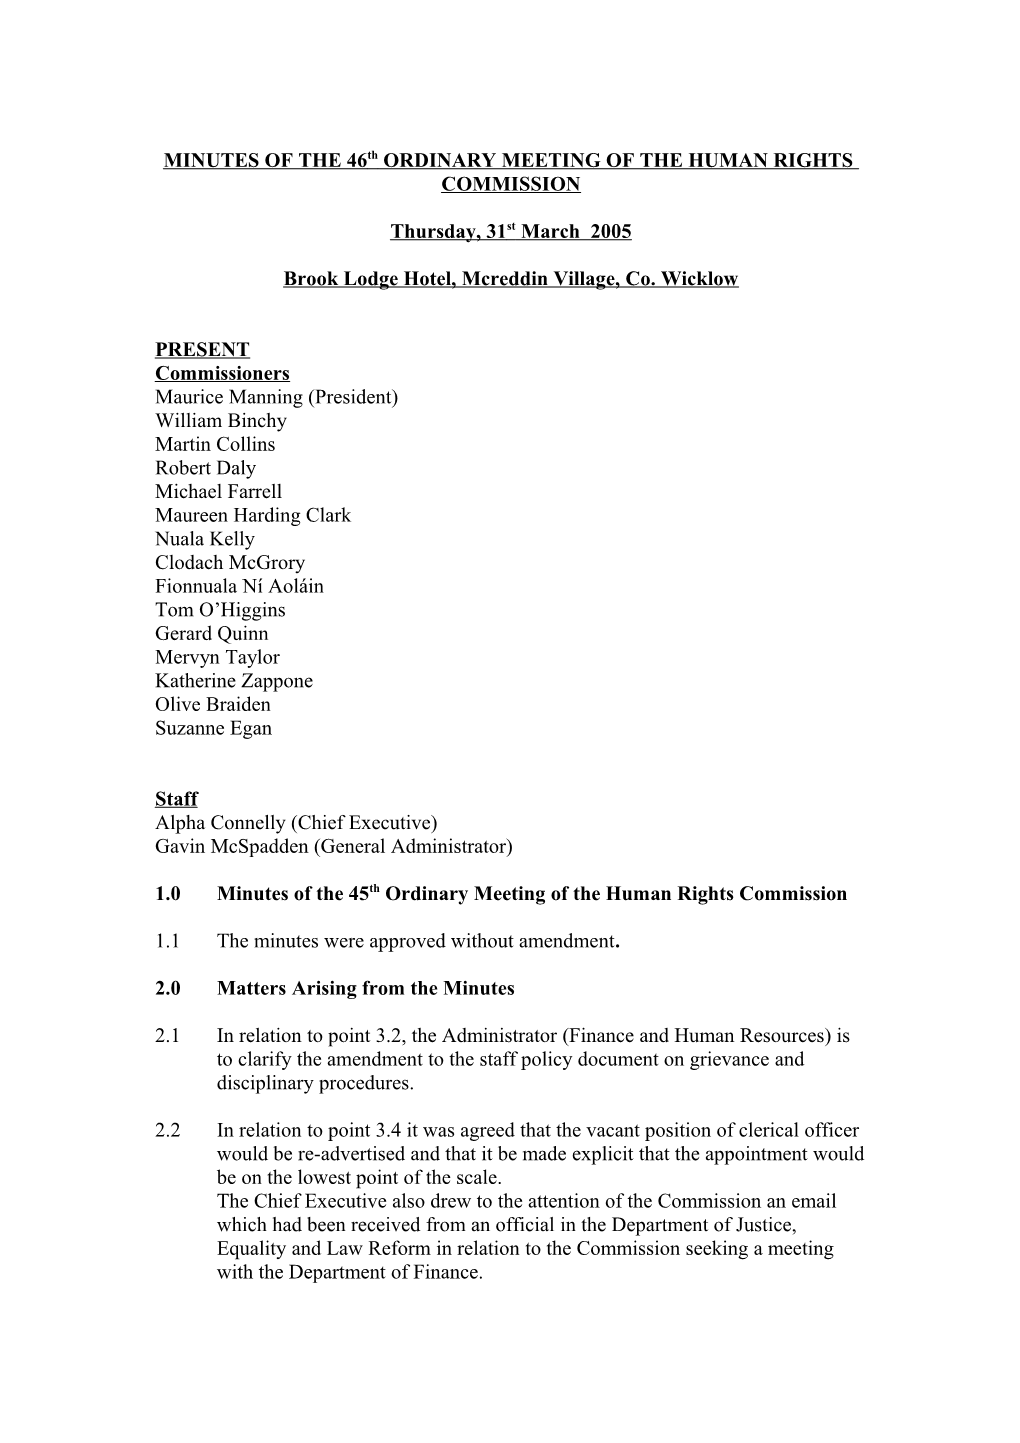 Minutes of the 31St Ordinary Meeting of the Human Rights Commission